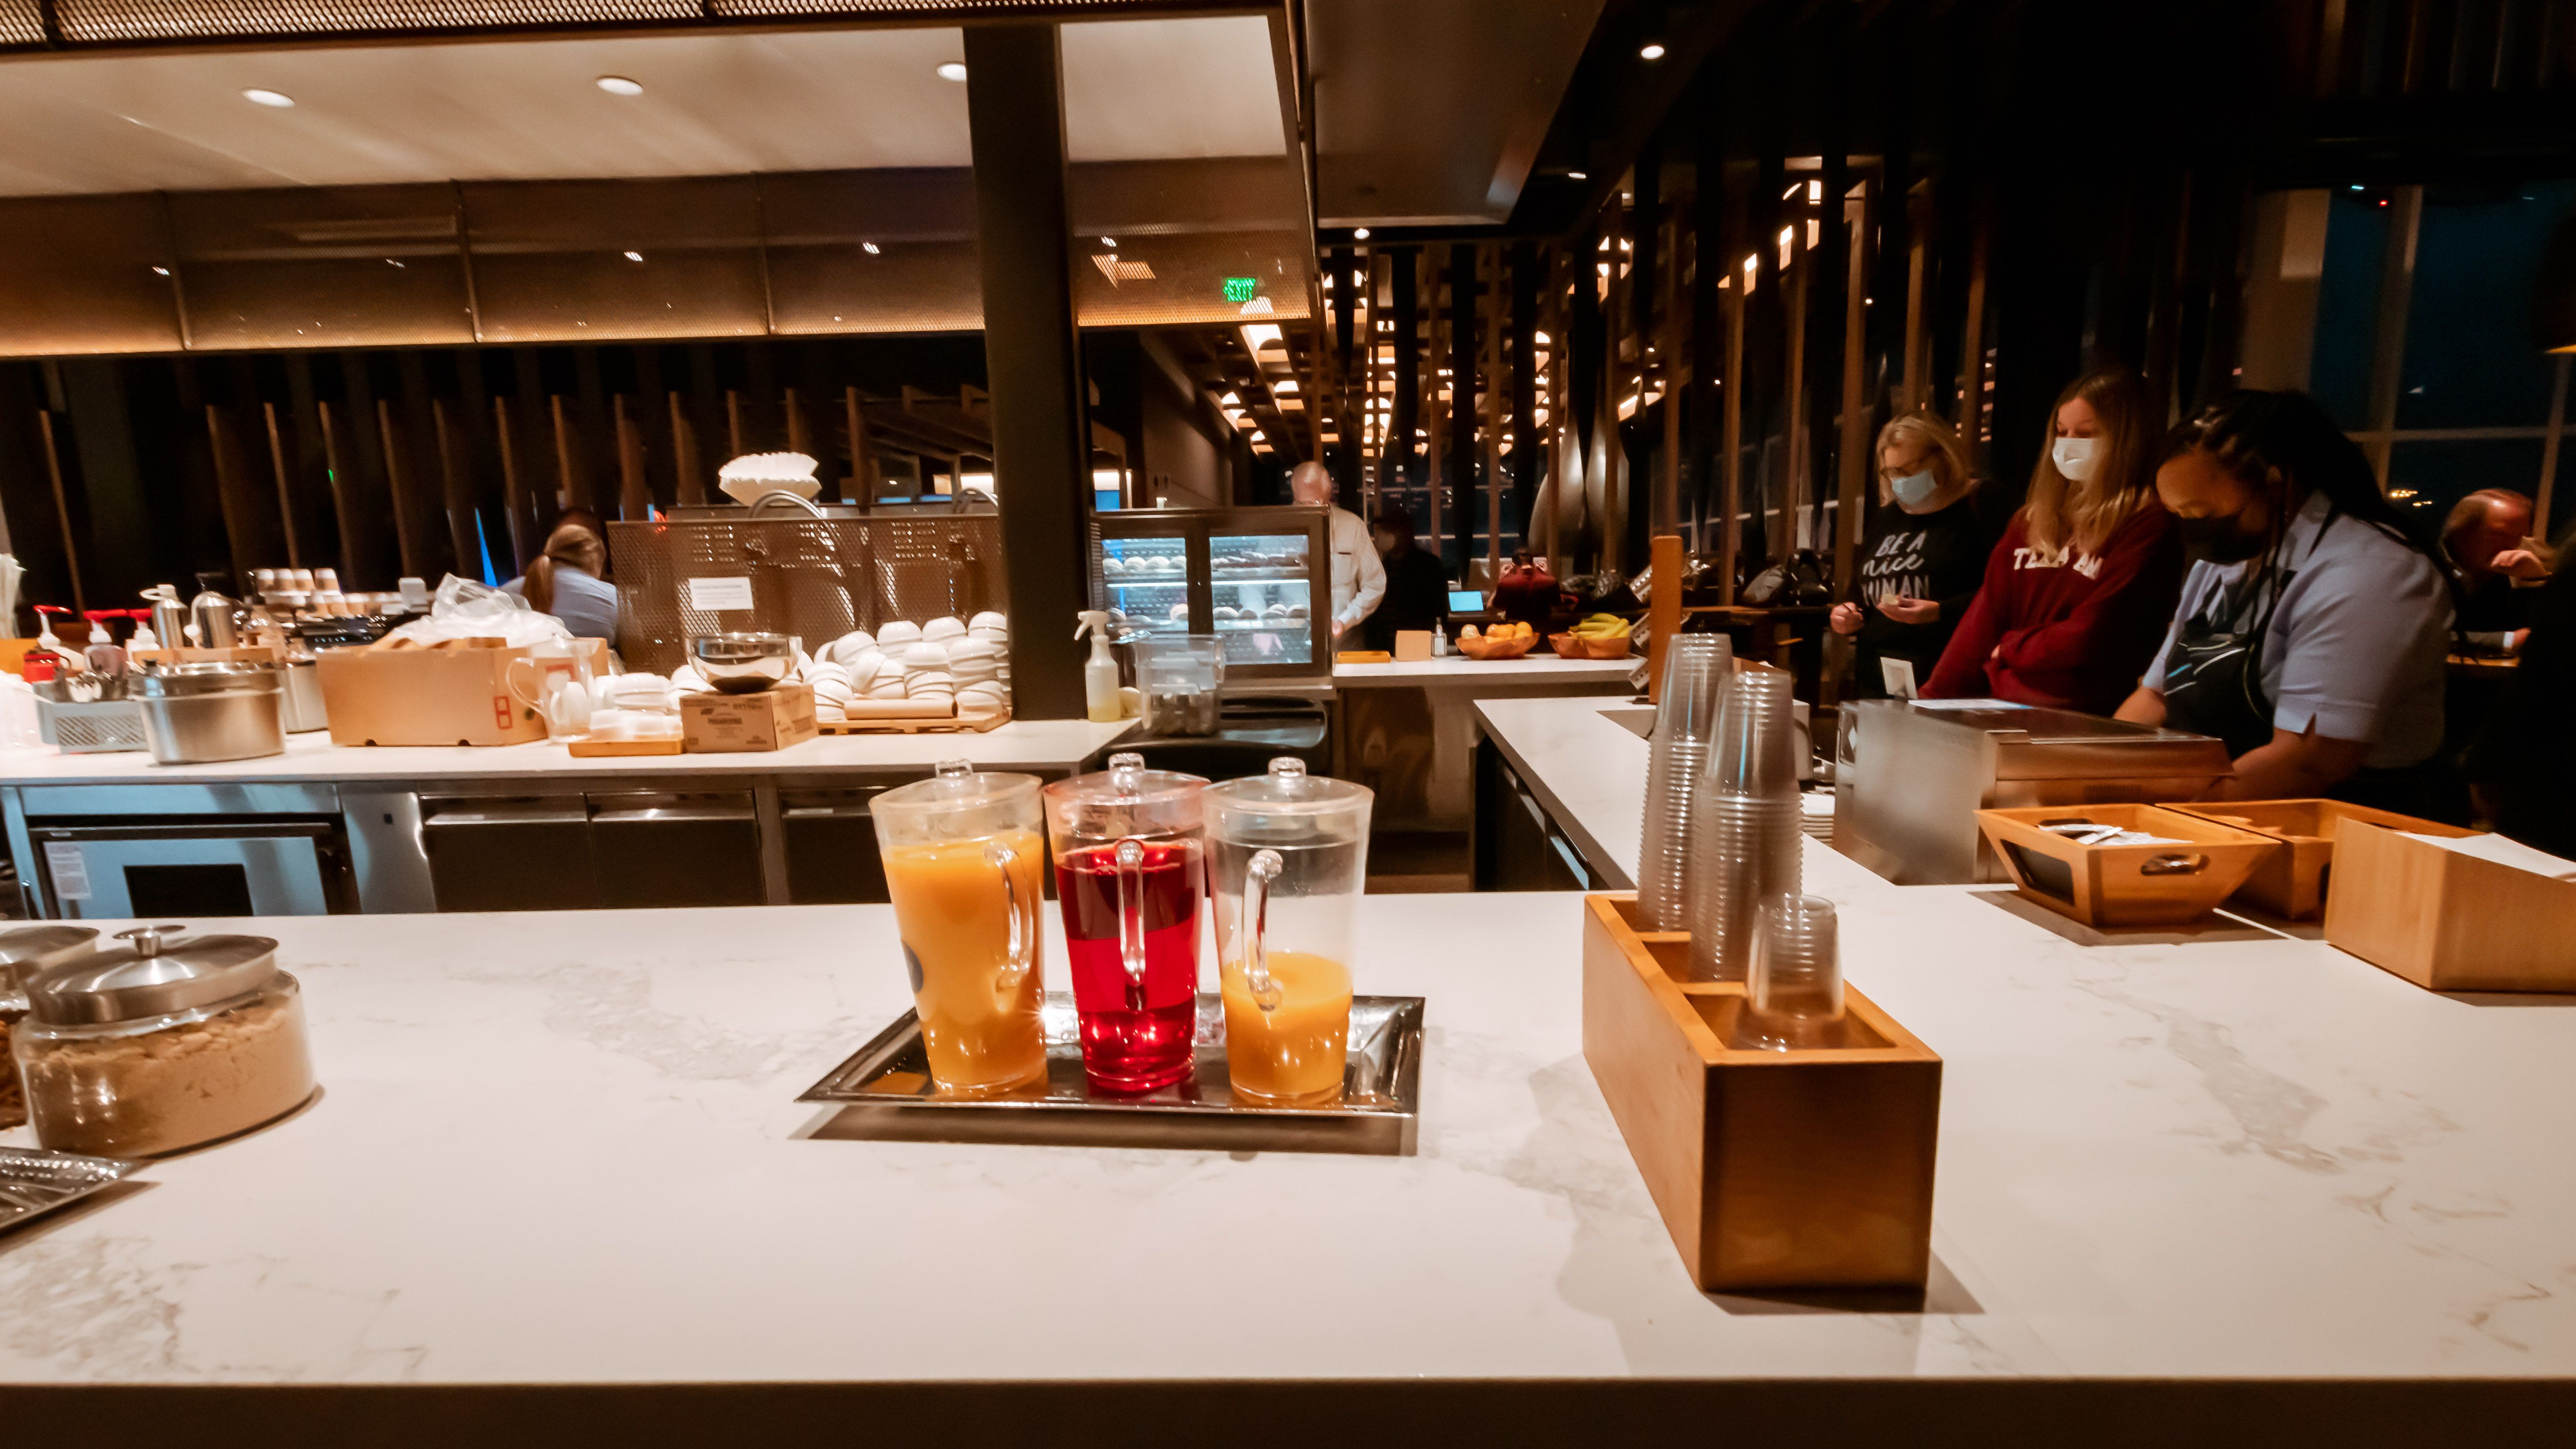 A Well Stocked Alaska Airlines Lounge - With Juices, Cups and Guests